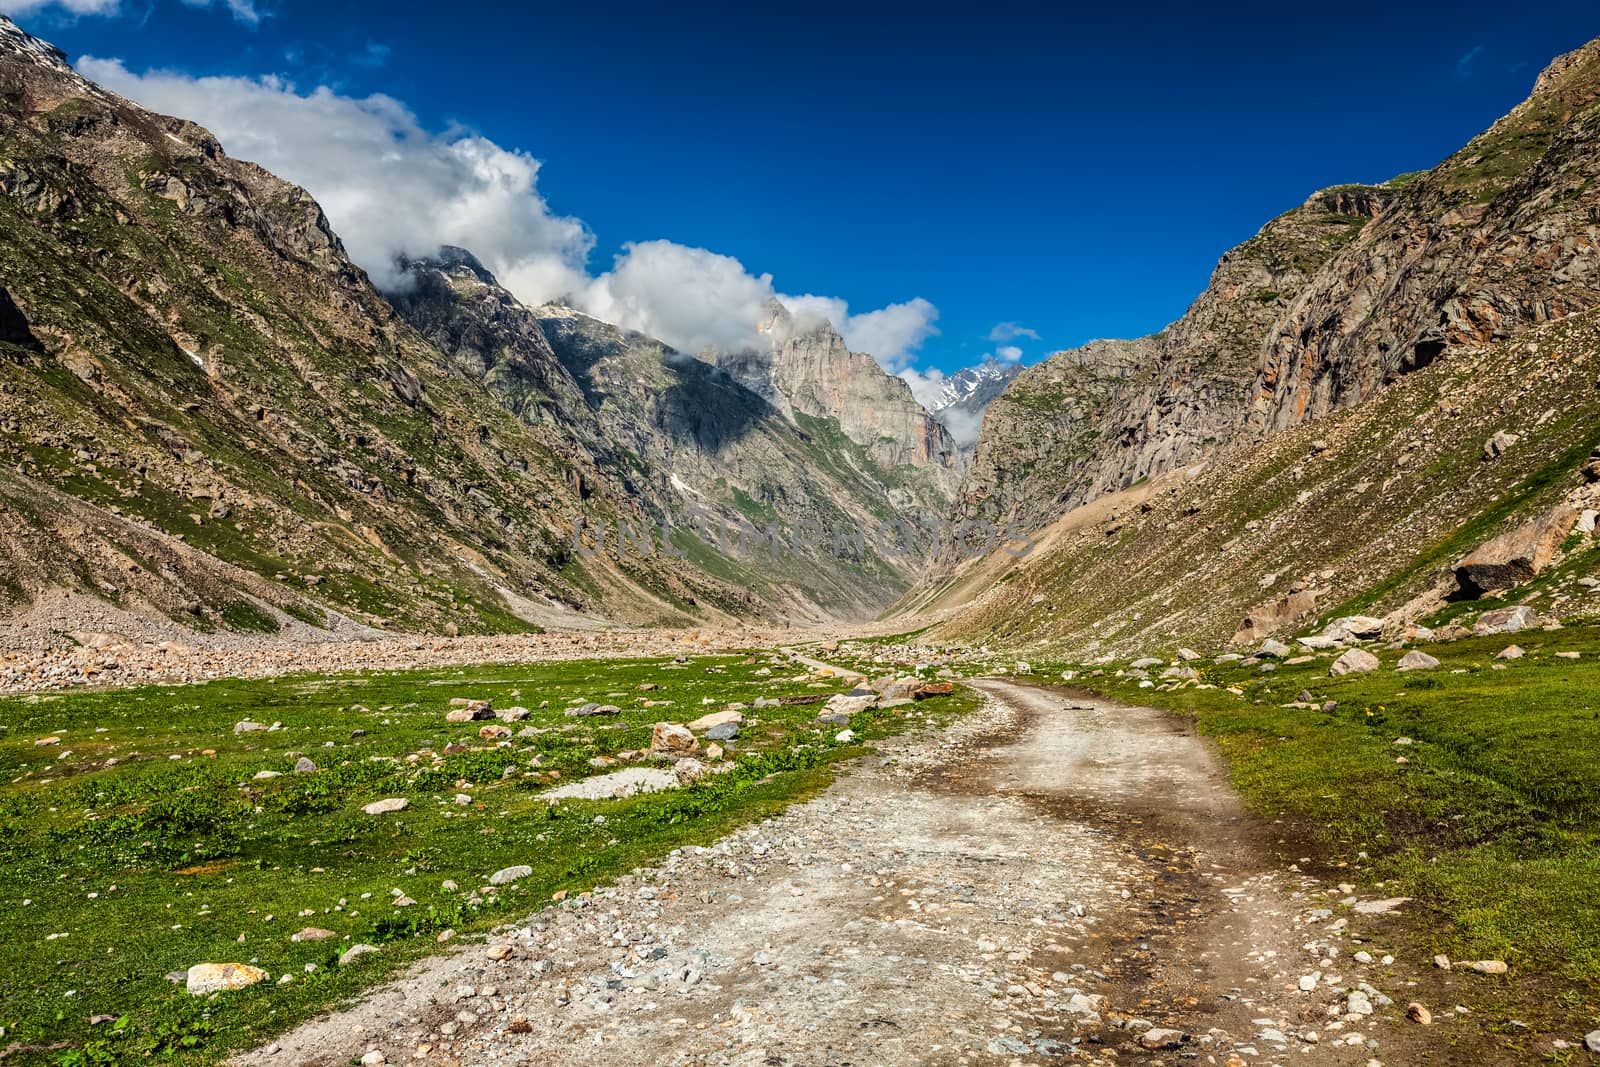 Dirt road in Himalayas. by dimol